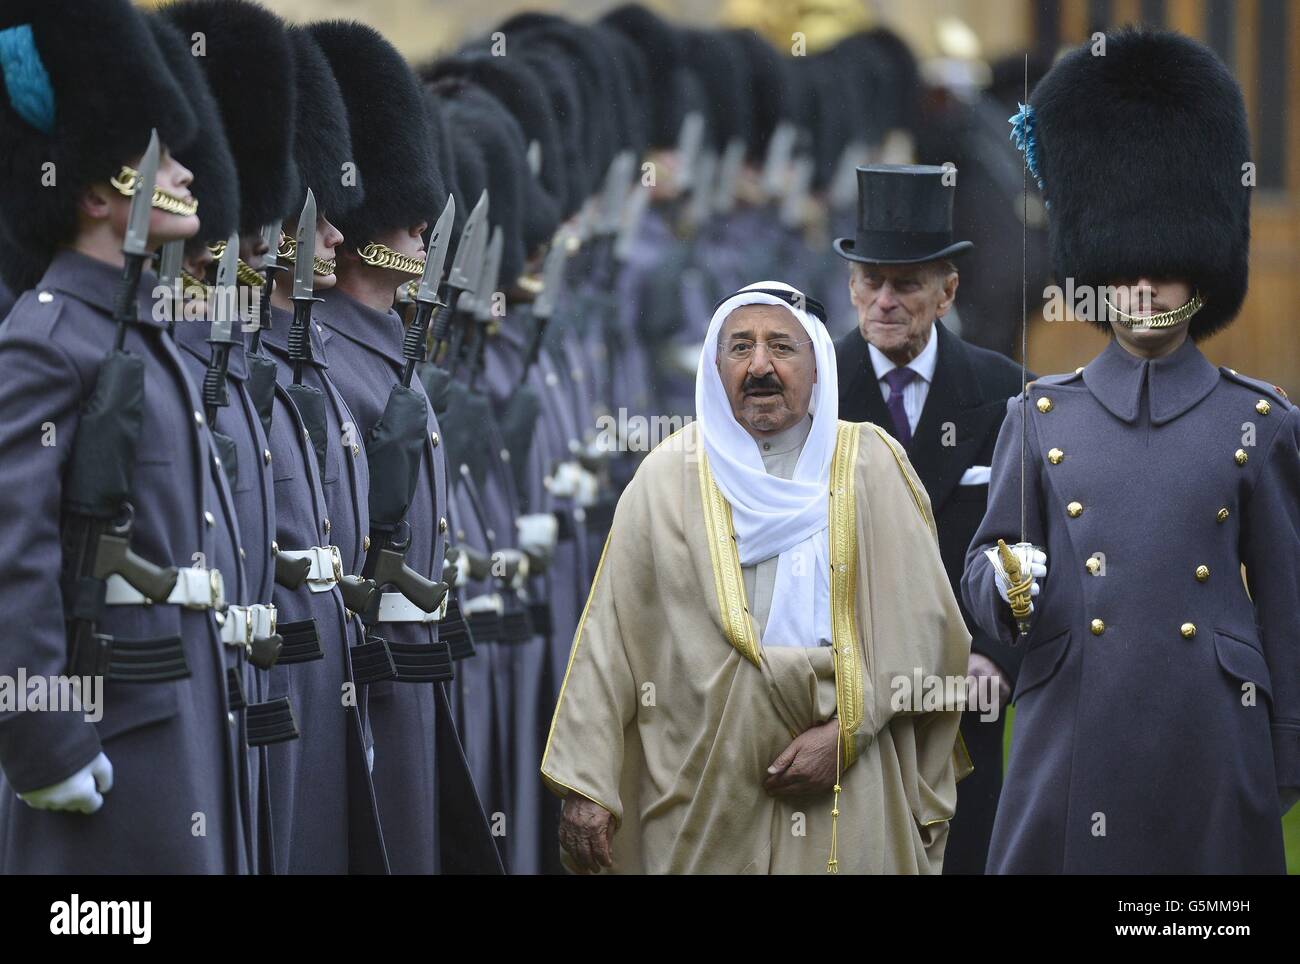 The Amir of the State of Kuwait, His Highness Sheikh Sabah Al-Ahmad Al-Jaber Al-Sabah, followed by the Duke of Edinburgh as they inspect members of the 1st Battalion Irish Guards, at Windsor Castle during the first day of his State Visit to the UK. Stock Photo